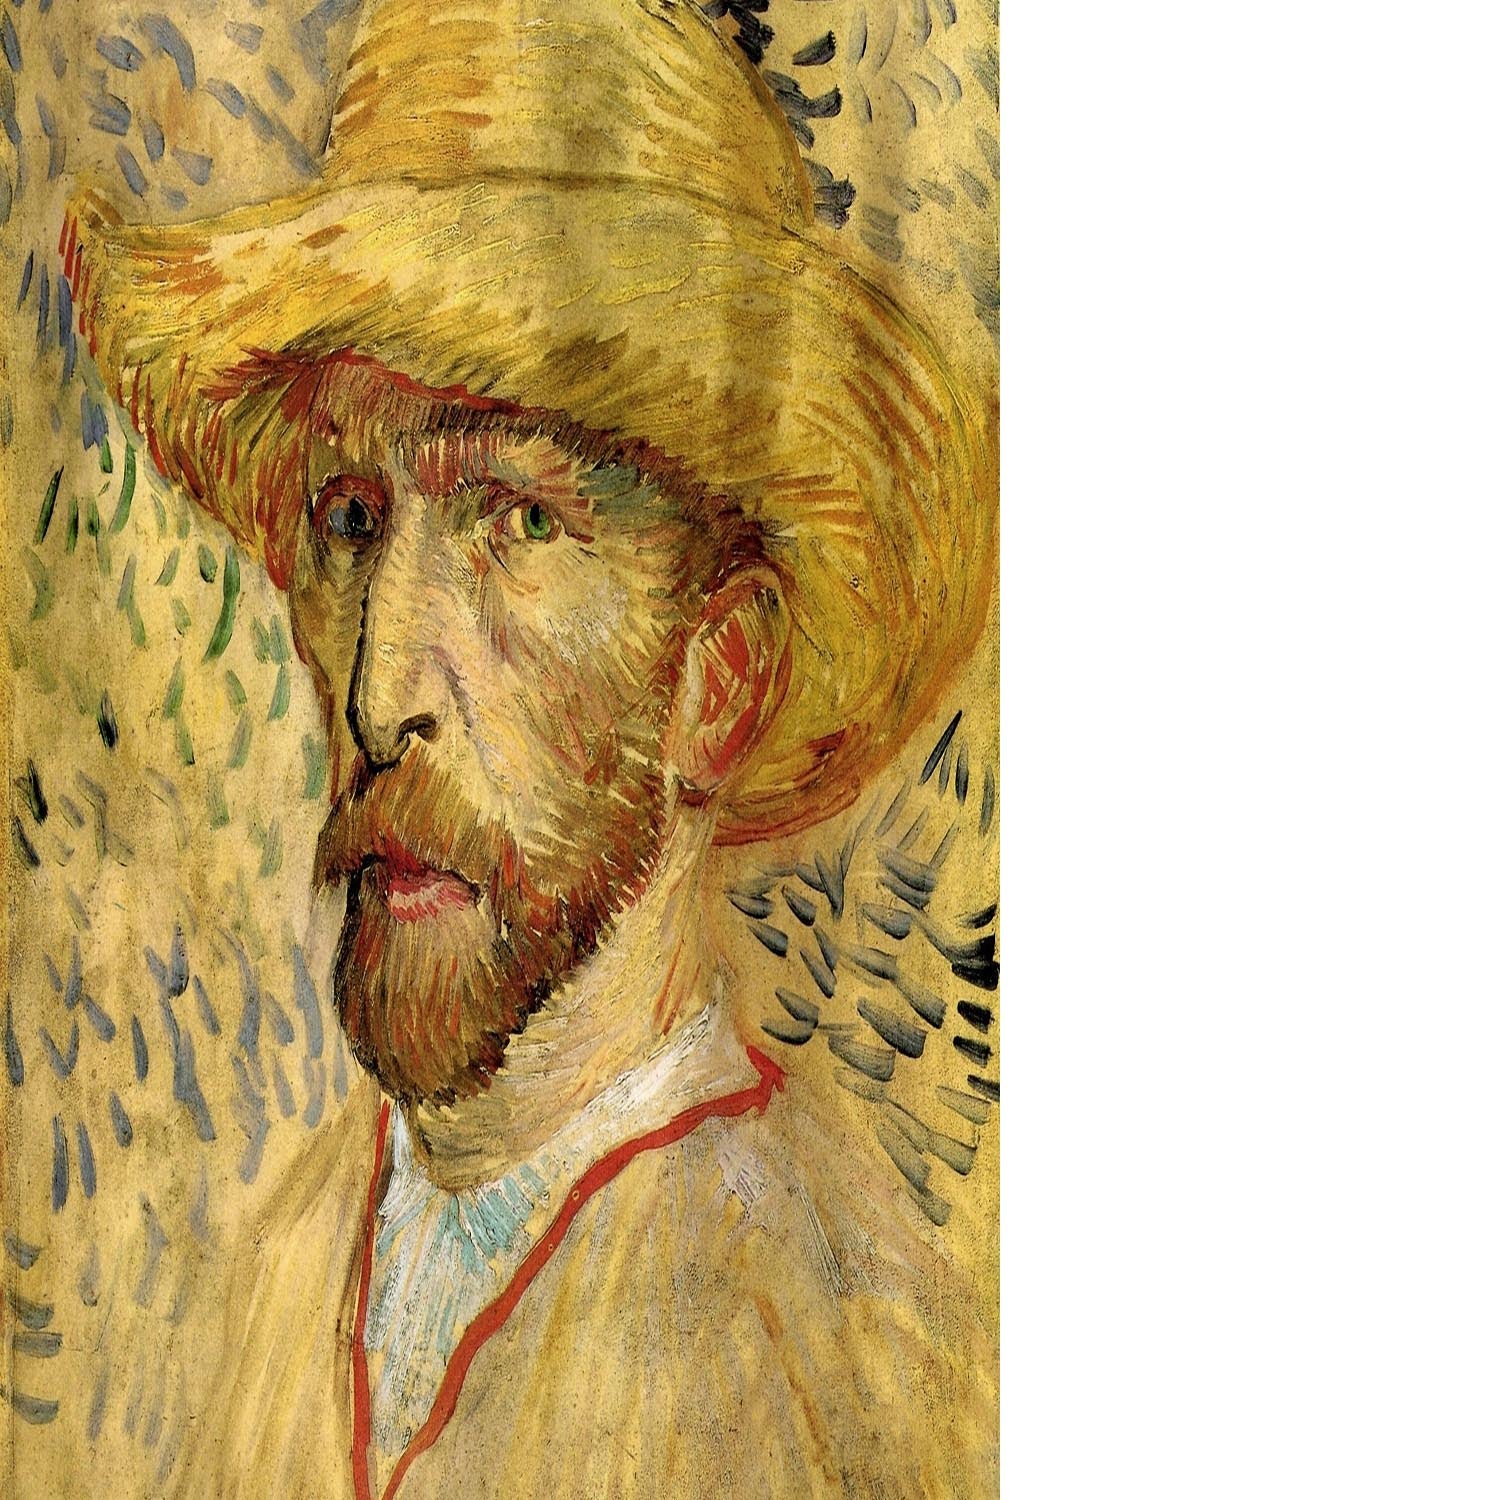 Self-Portrait with Straw Hat 2 by Van Gogh Floating Framed Canvas